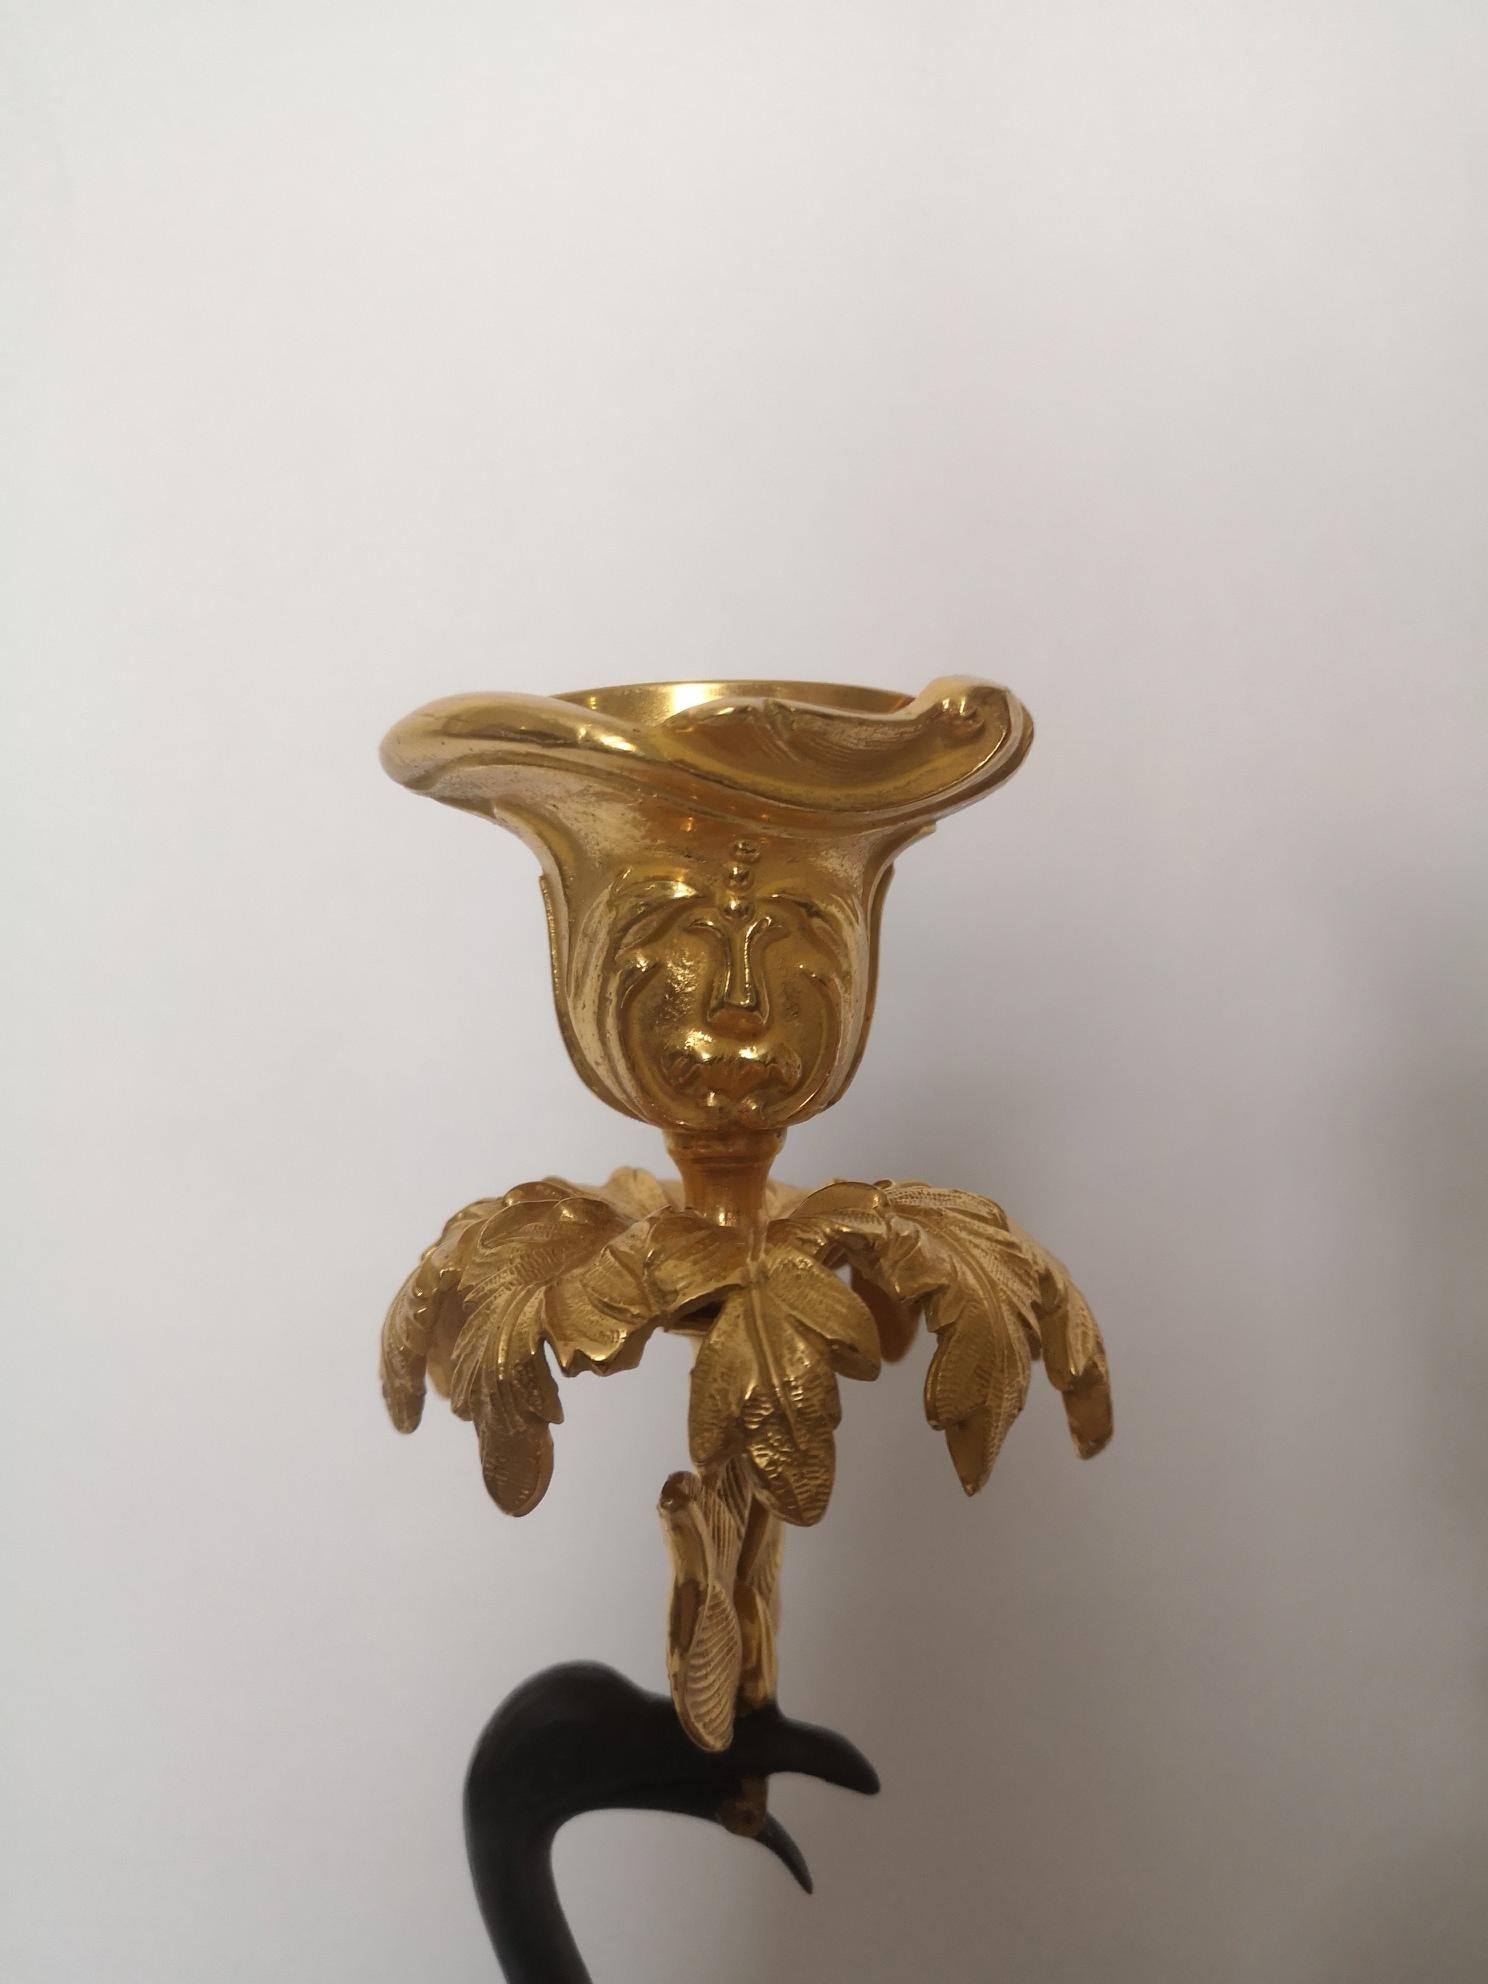 Pair of Early 19th Century English Bronze and Gilt Stork Candlesticks by Abbot In Good Condition For Sale In London, GB